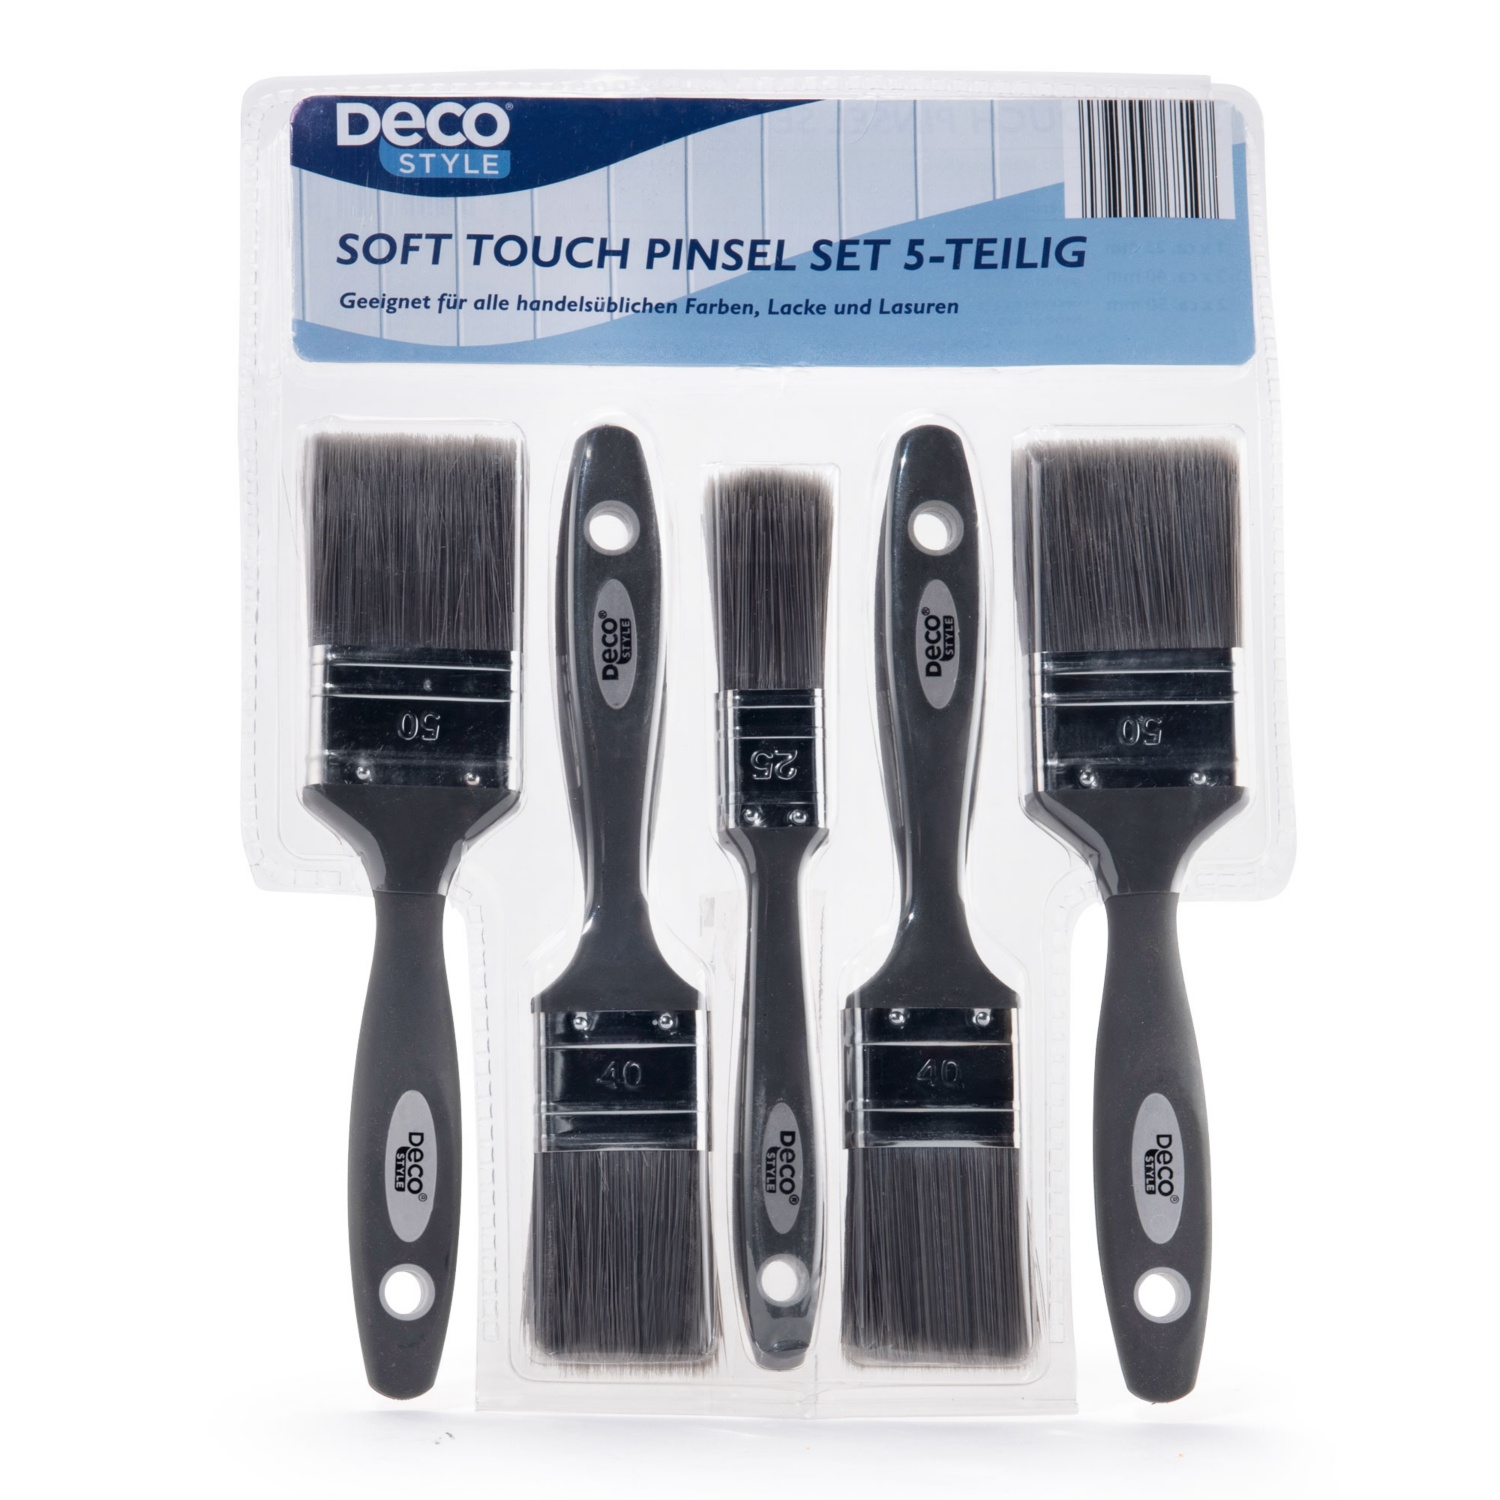 DECO STYLE Soft Touch Pinselset, 5-teilig